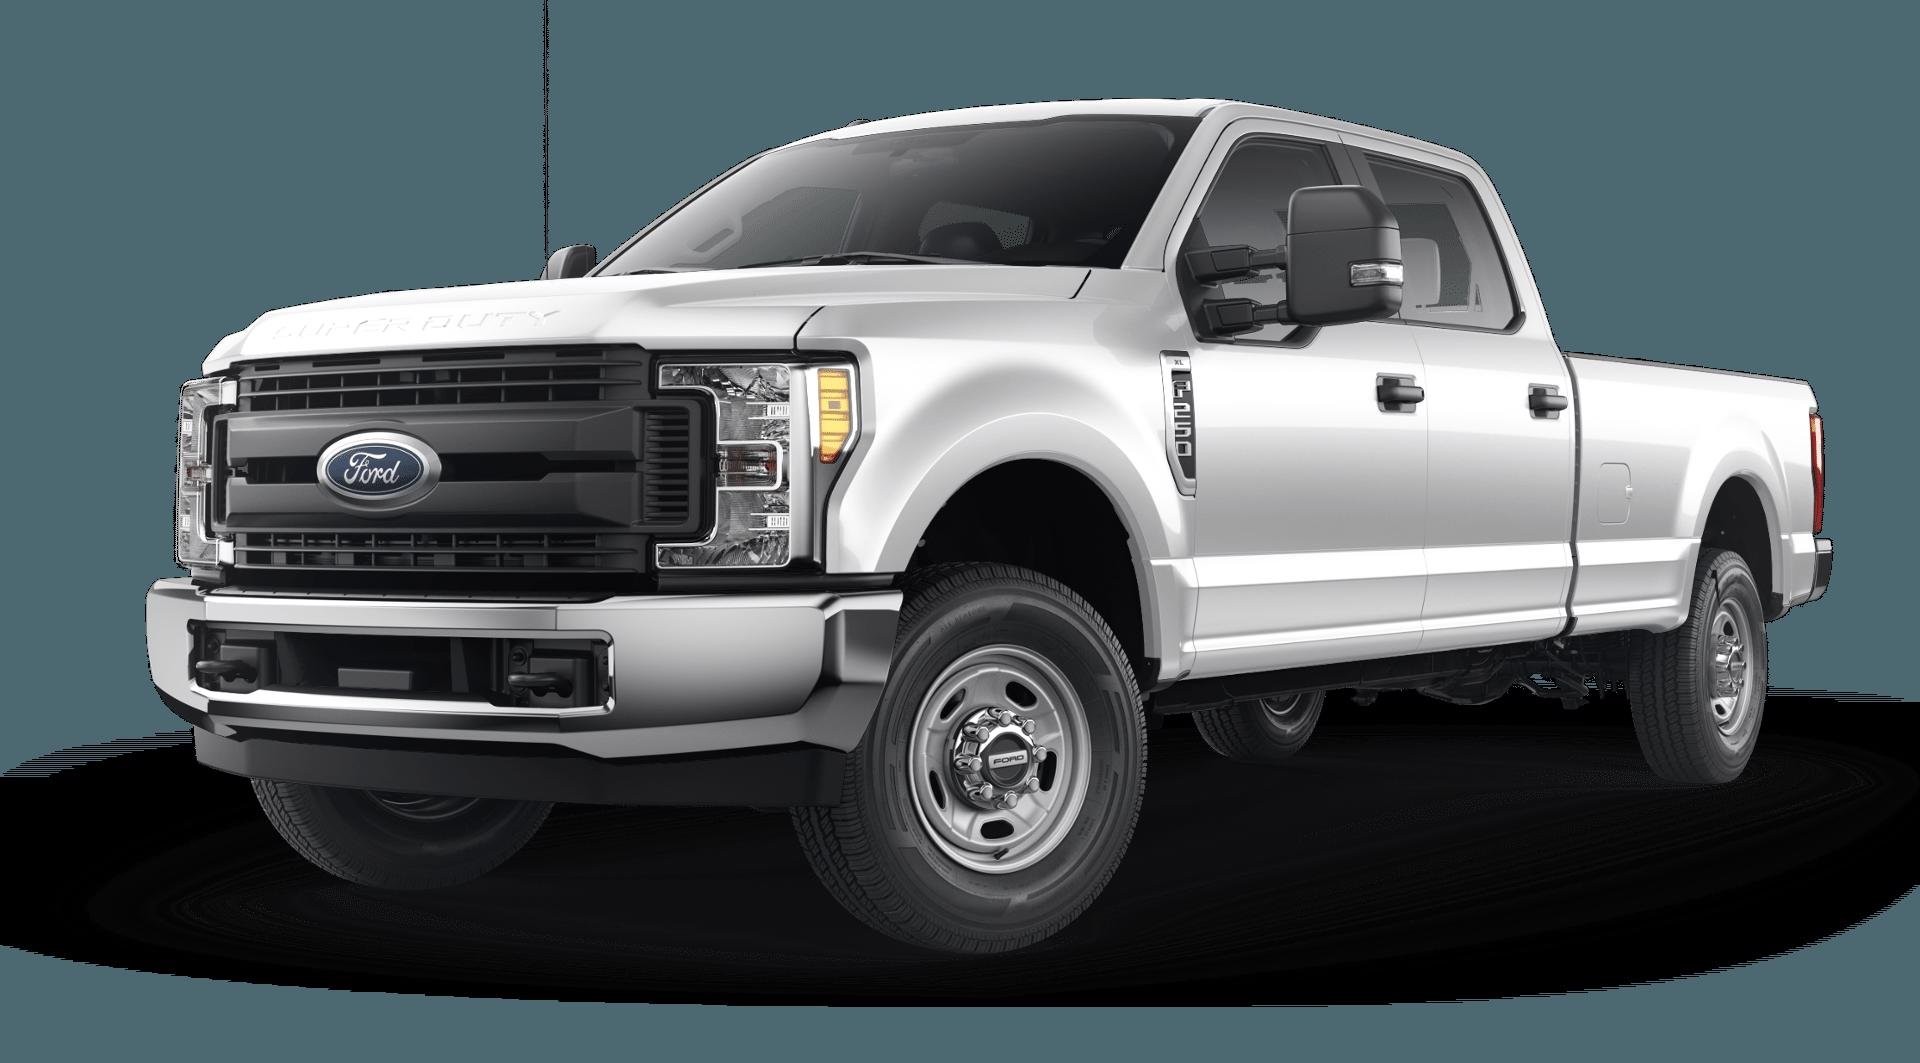 Fprd Upfitter Swtches for 2011 F250 ford New 2019 ford Super Duty F 250 Srw Xl Rwd Crew Cab Pickup Of Fprd Upfitter Swtches for 2011 F250 ford